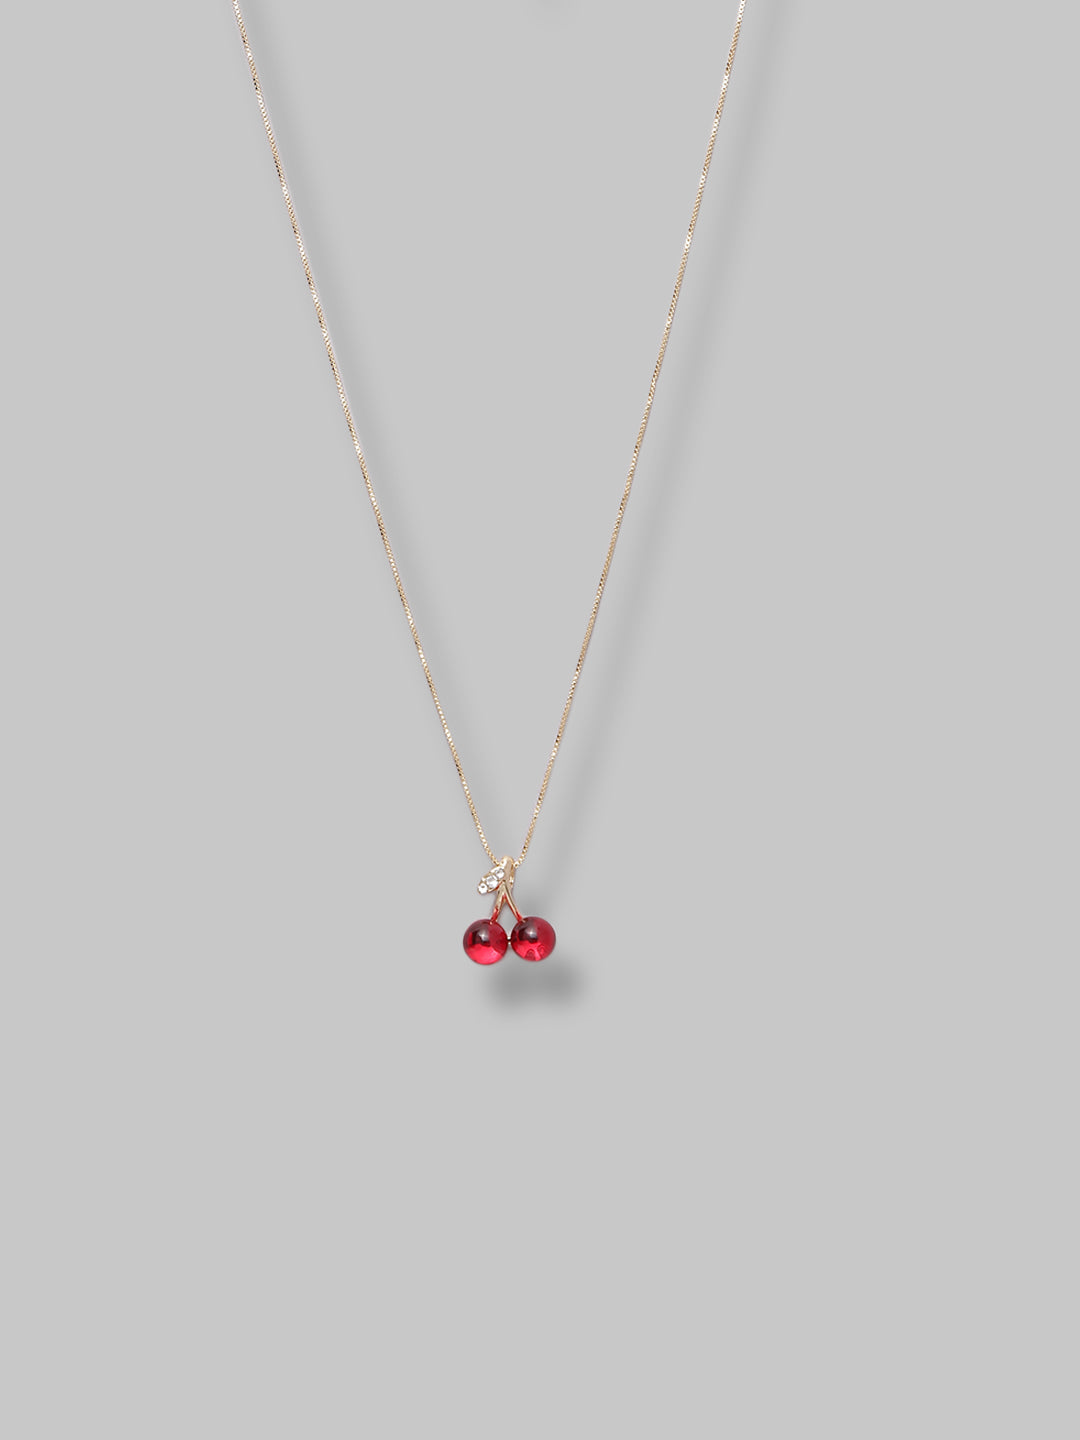 Gold Plated & Red Ball Shade Design Lightweight Chain For Women And Girls